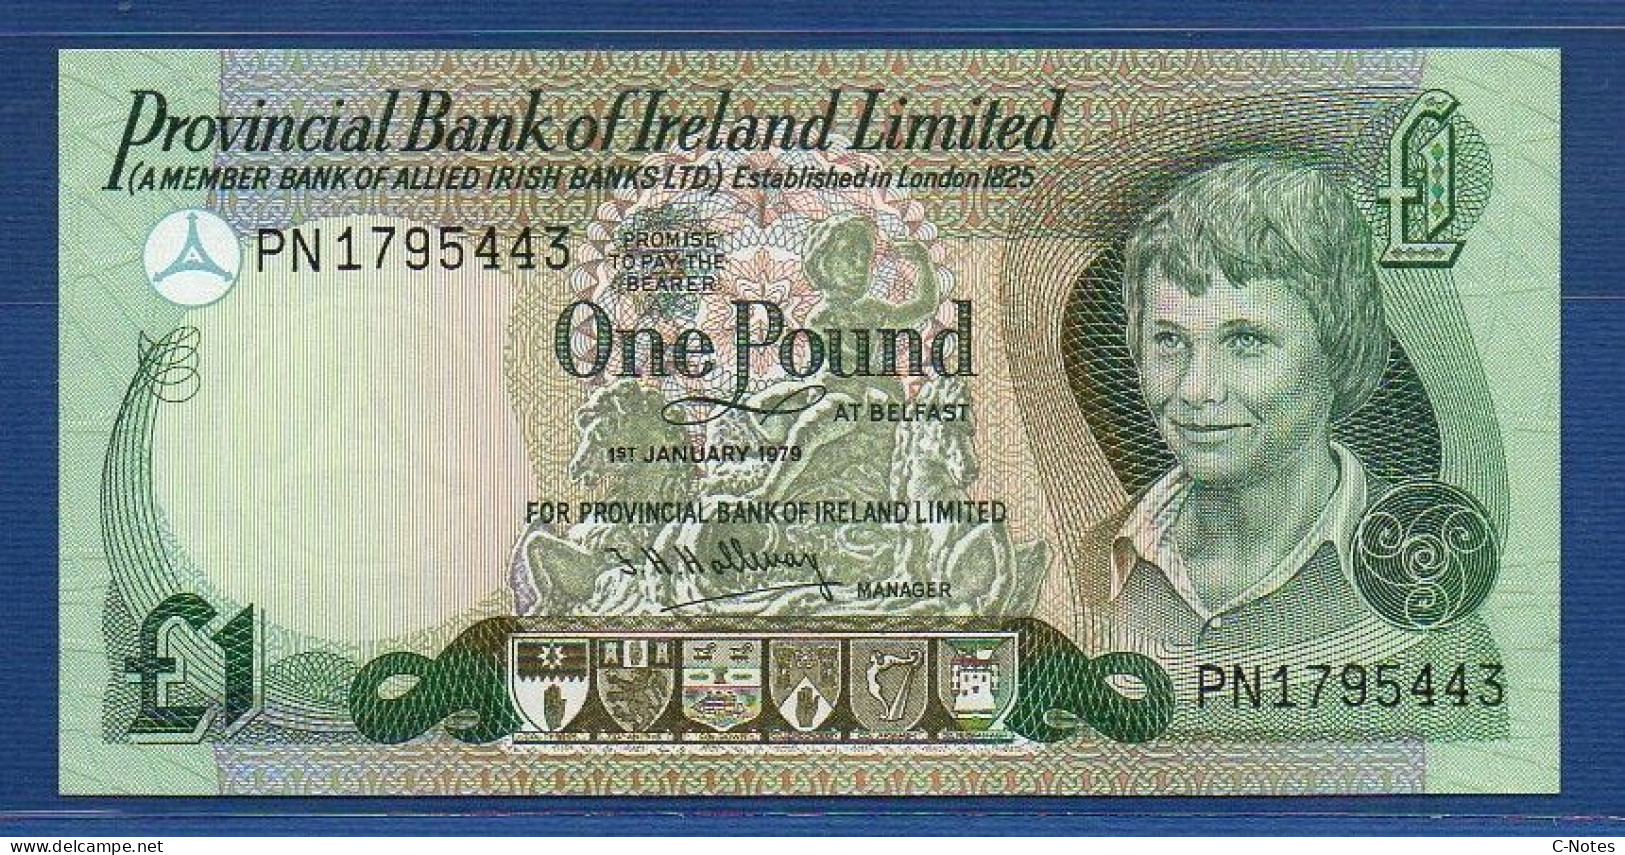 NORTHERN IRELAND - P.247b – 1 POUND 01.01.1979 UNC, S/n PN1795443 Provincial Bank Of Ireland Limited - 1 Pound